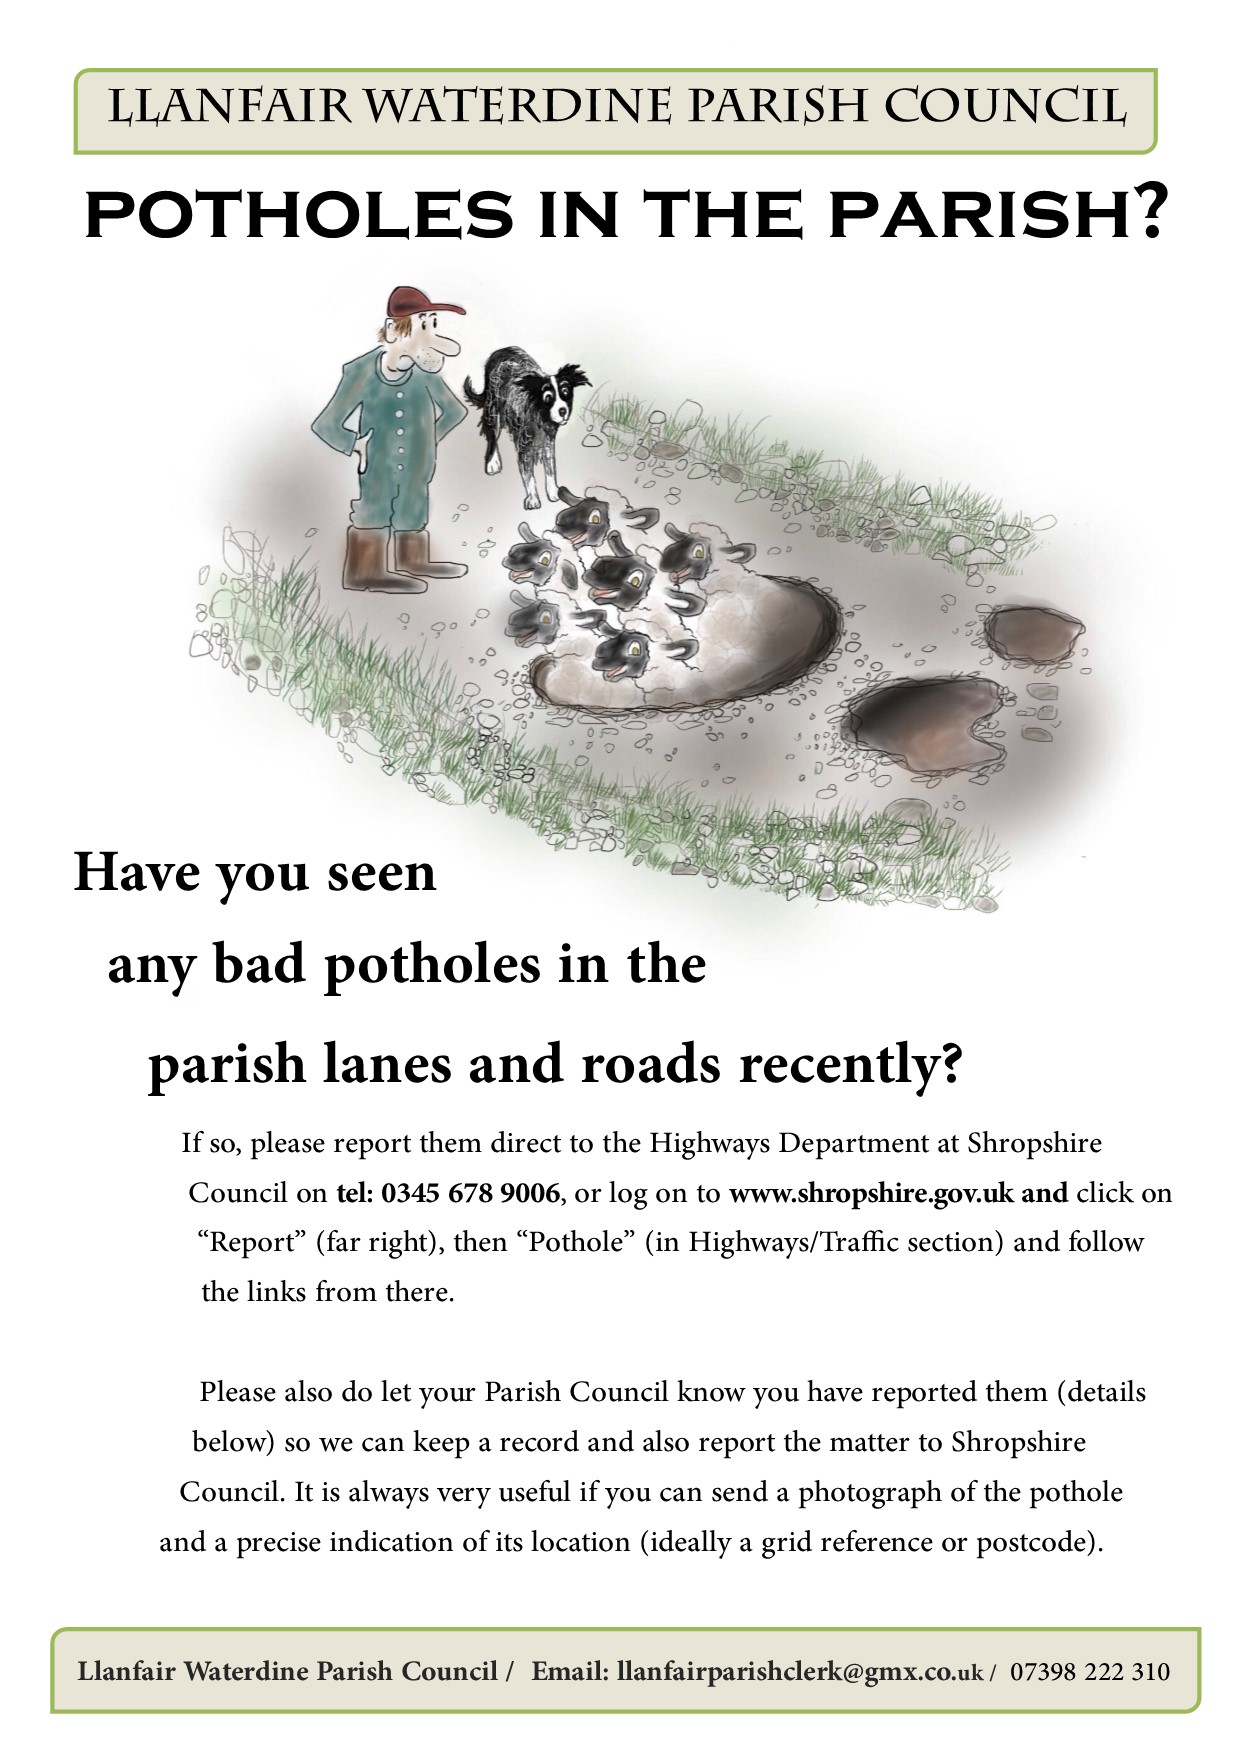 Image of Poster giving details on how to report potholes